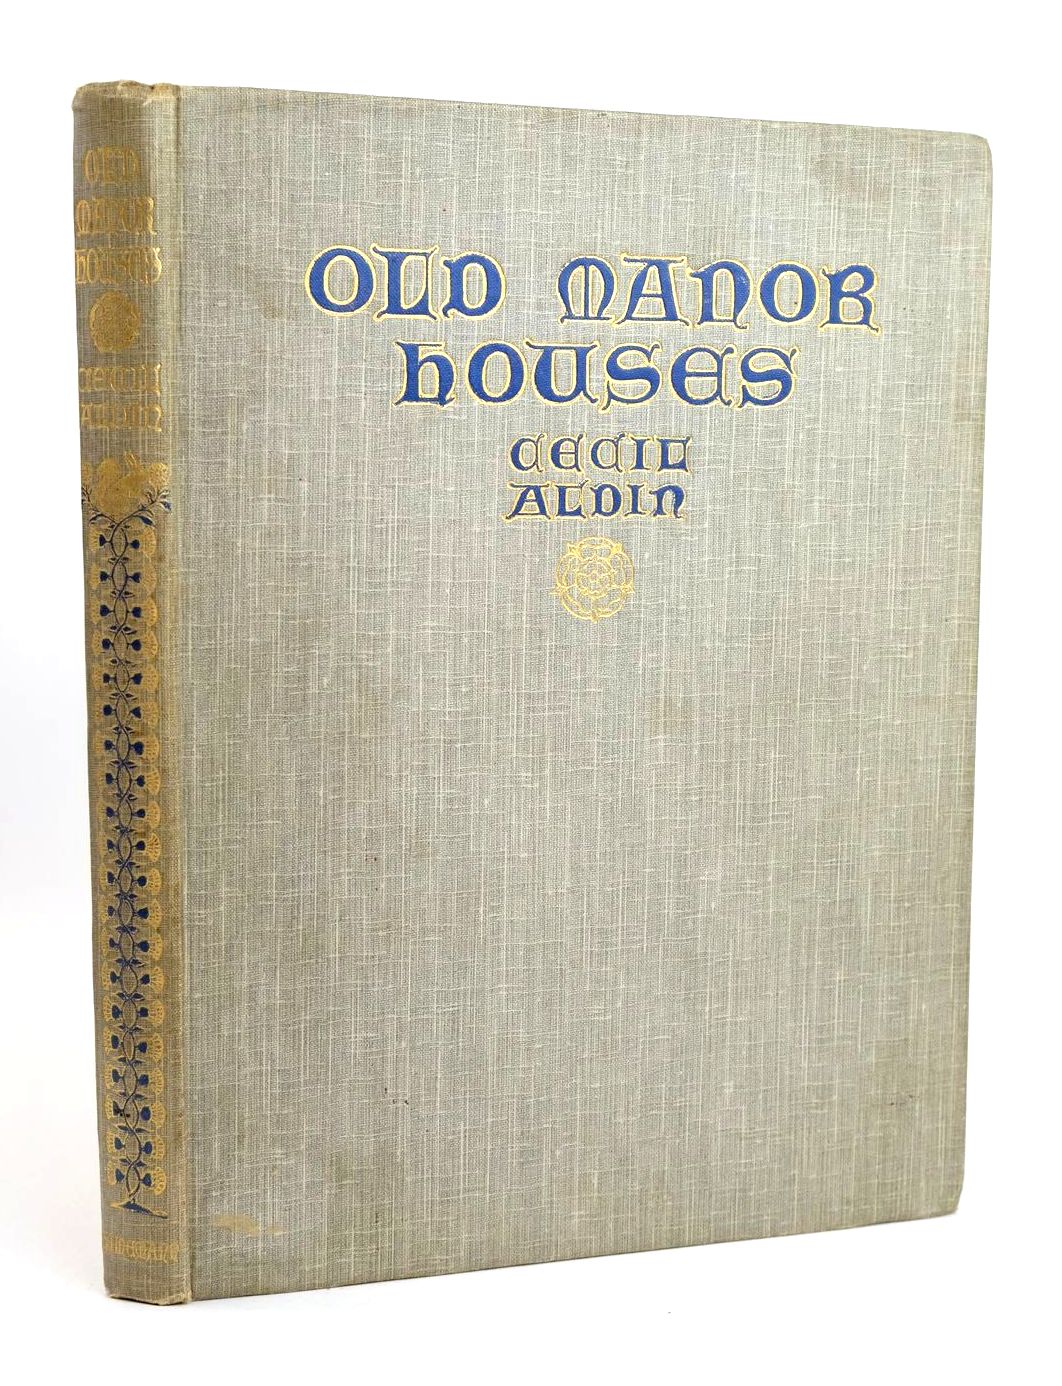 Photo of OLD MANOR HOUSES- Stock Number: 1319359